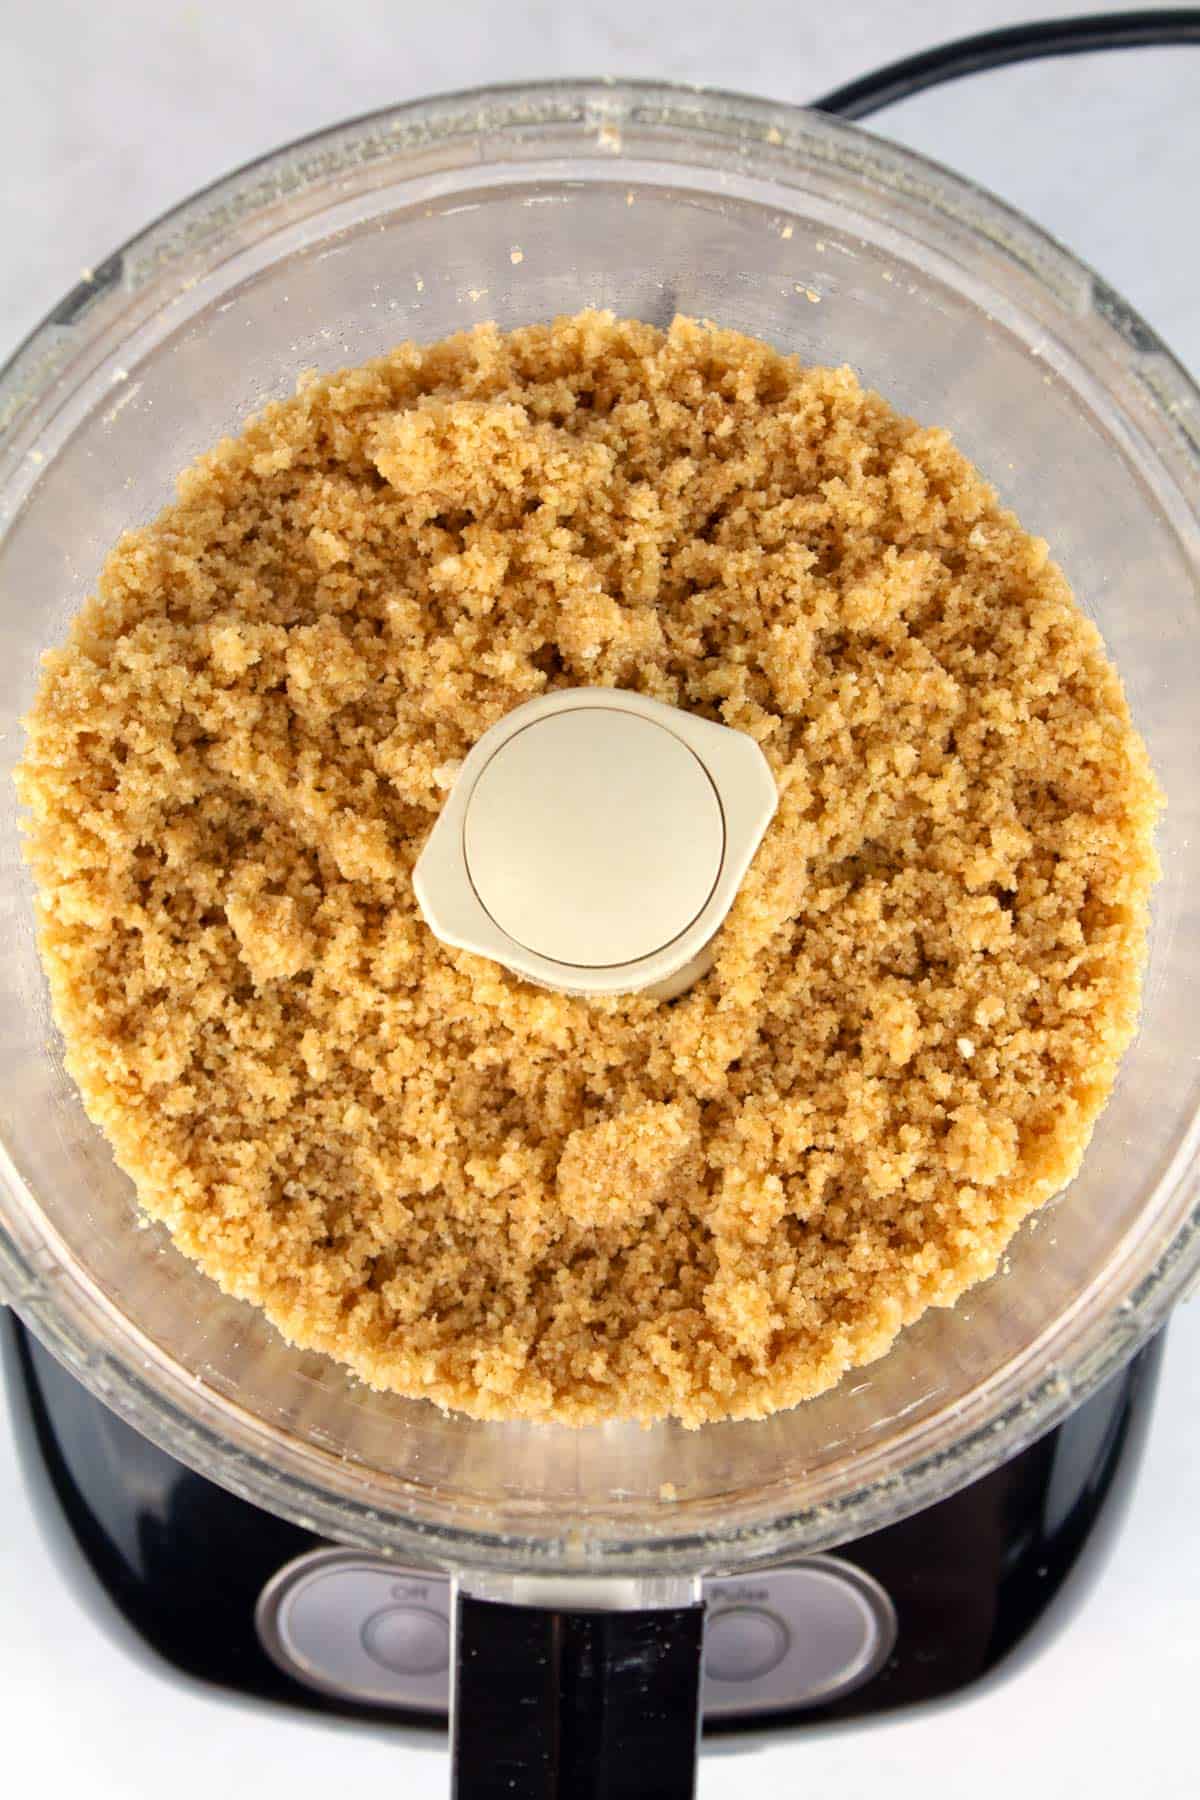 An overhead view of the crust ingredients blended in a food processor.